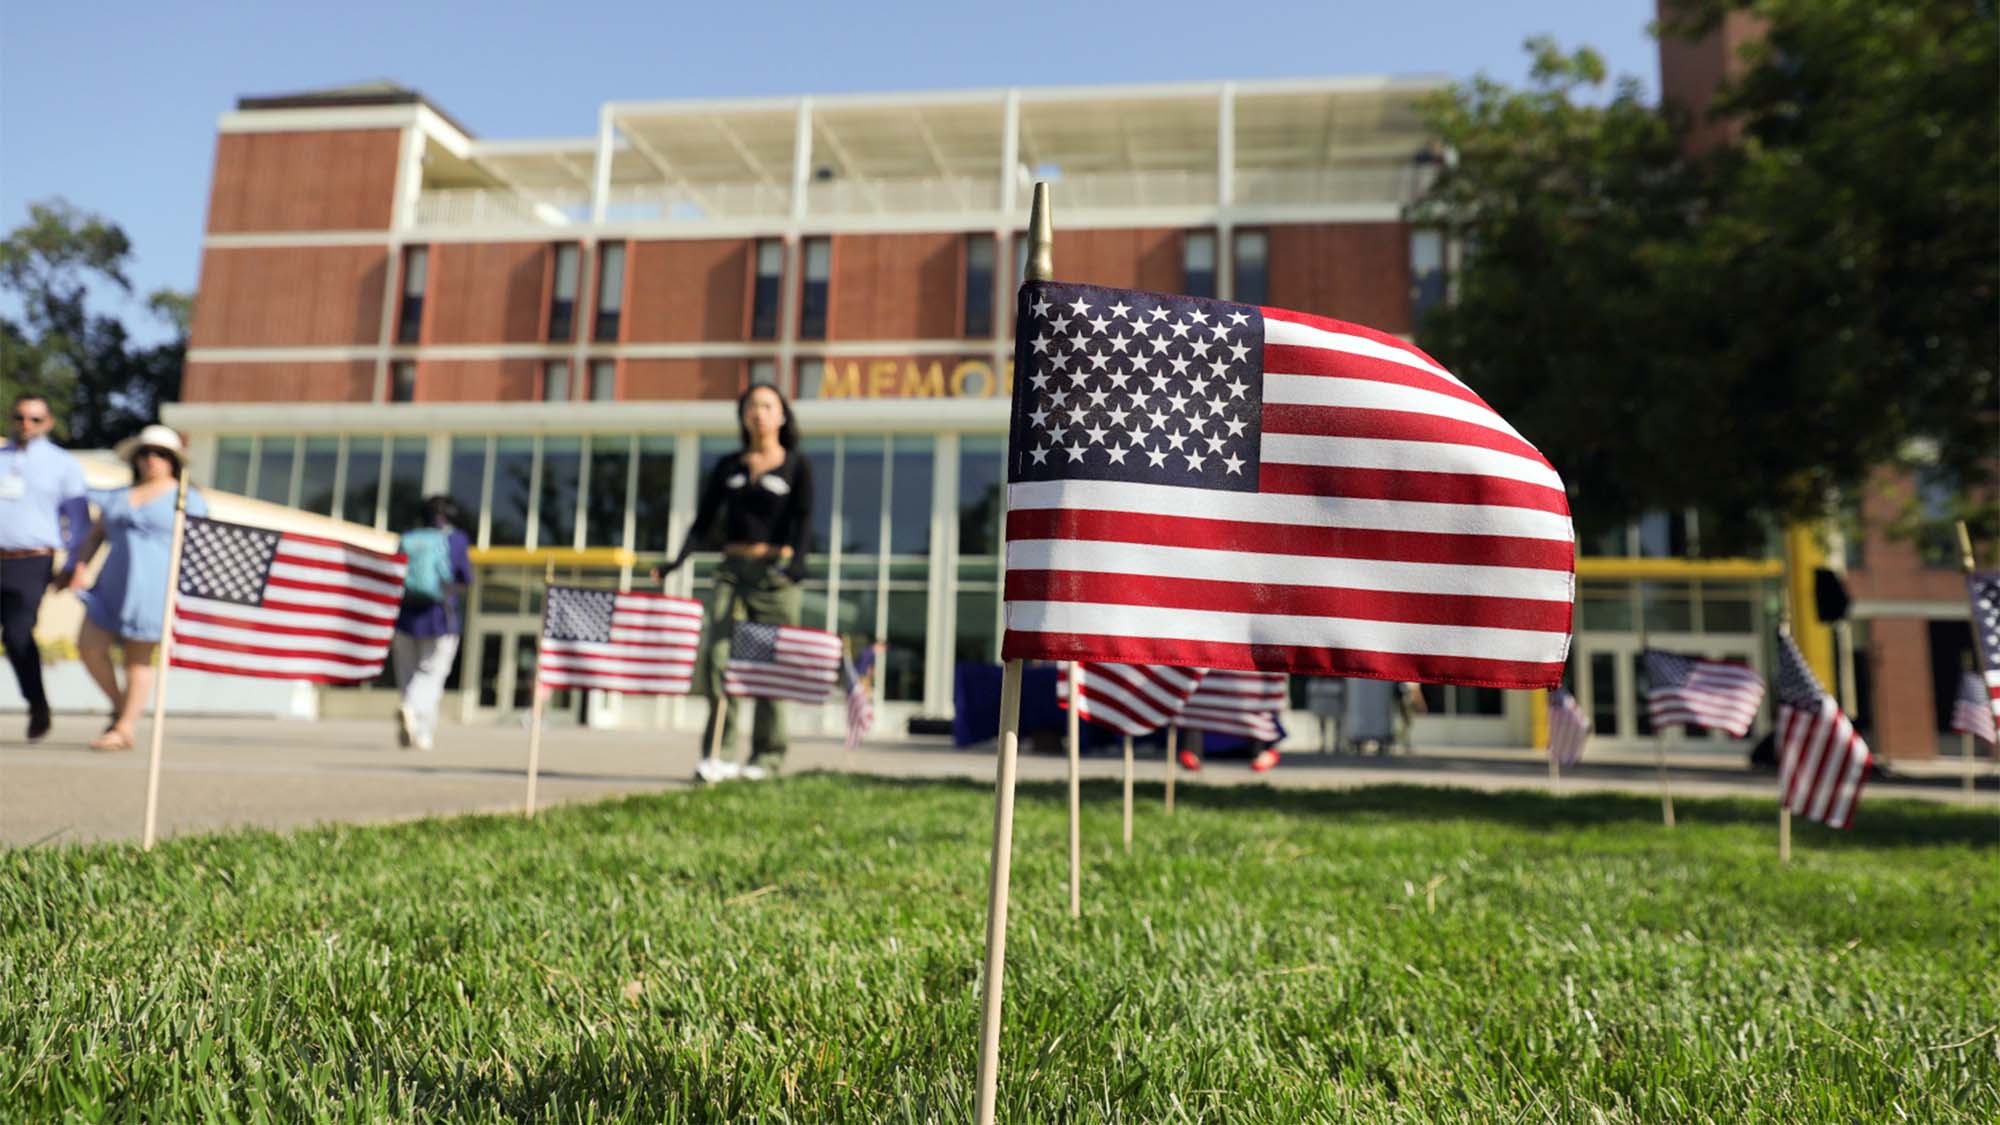 American flags are on display outside of the Memorial Union